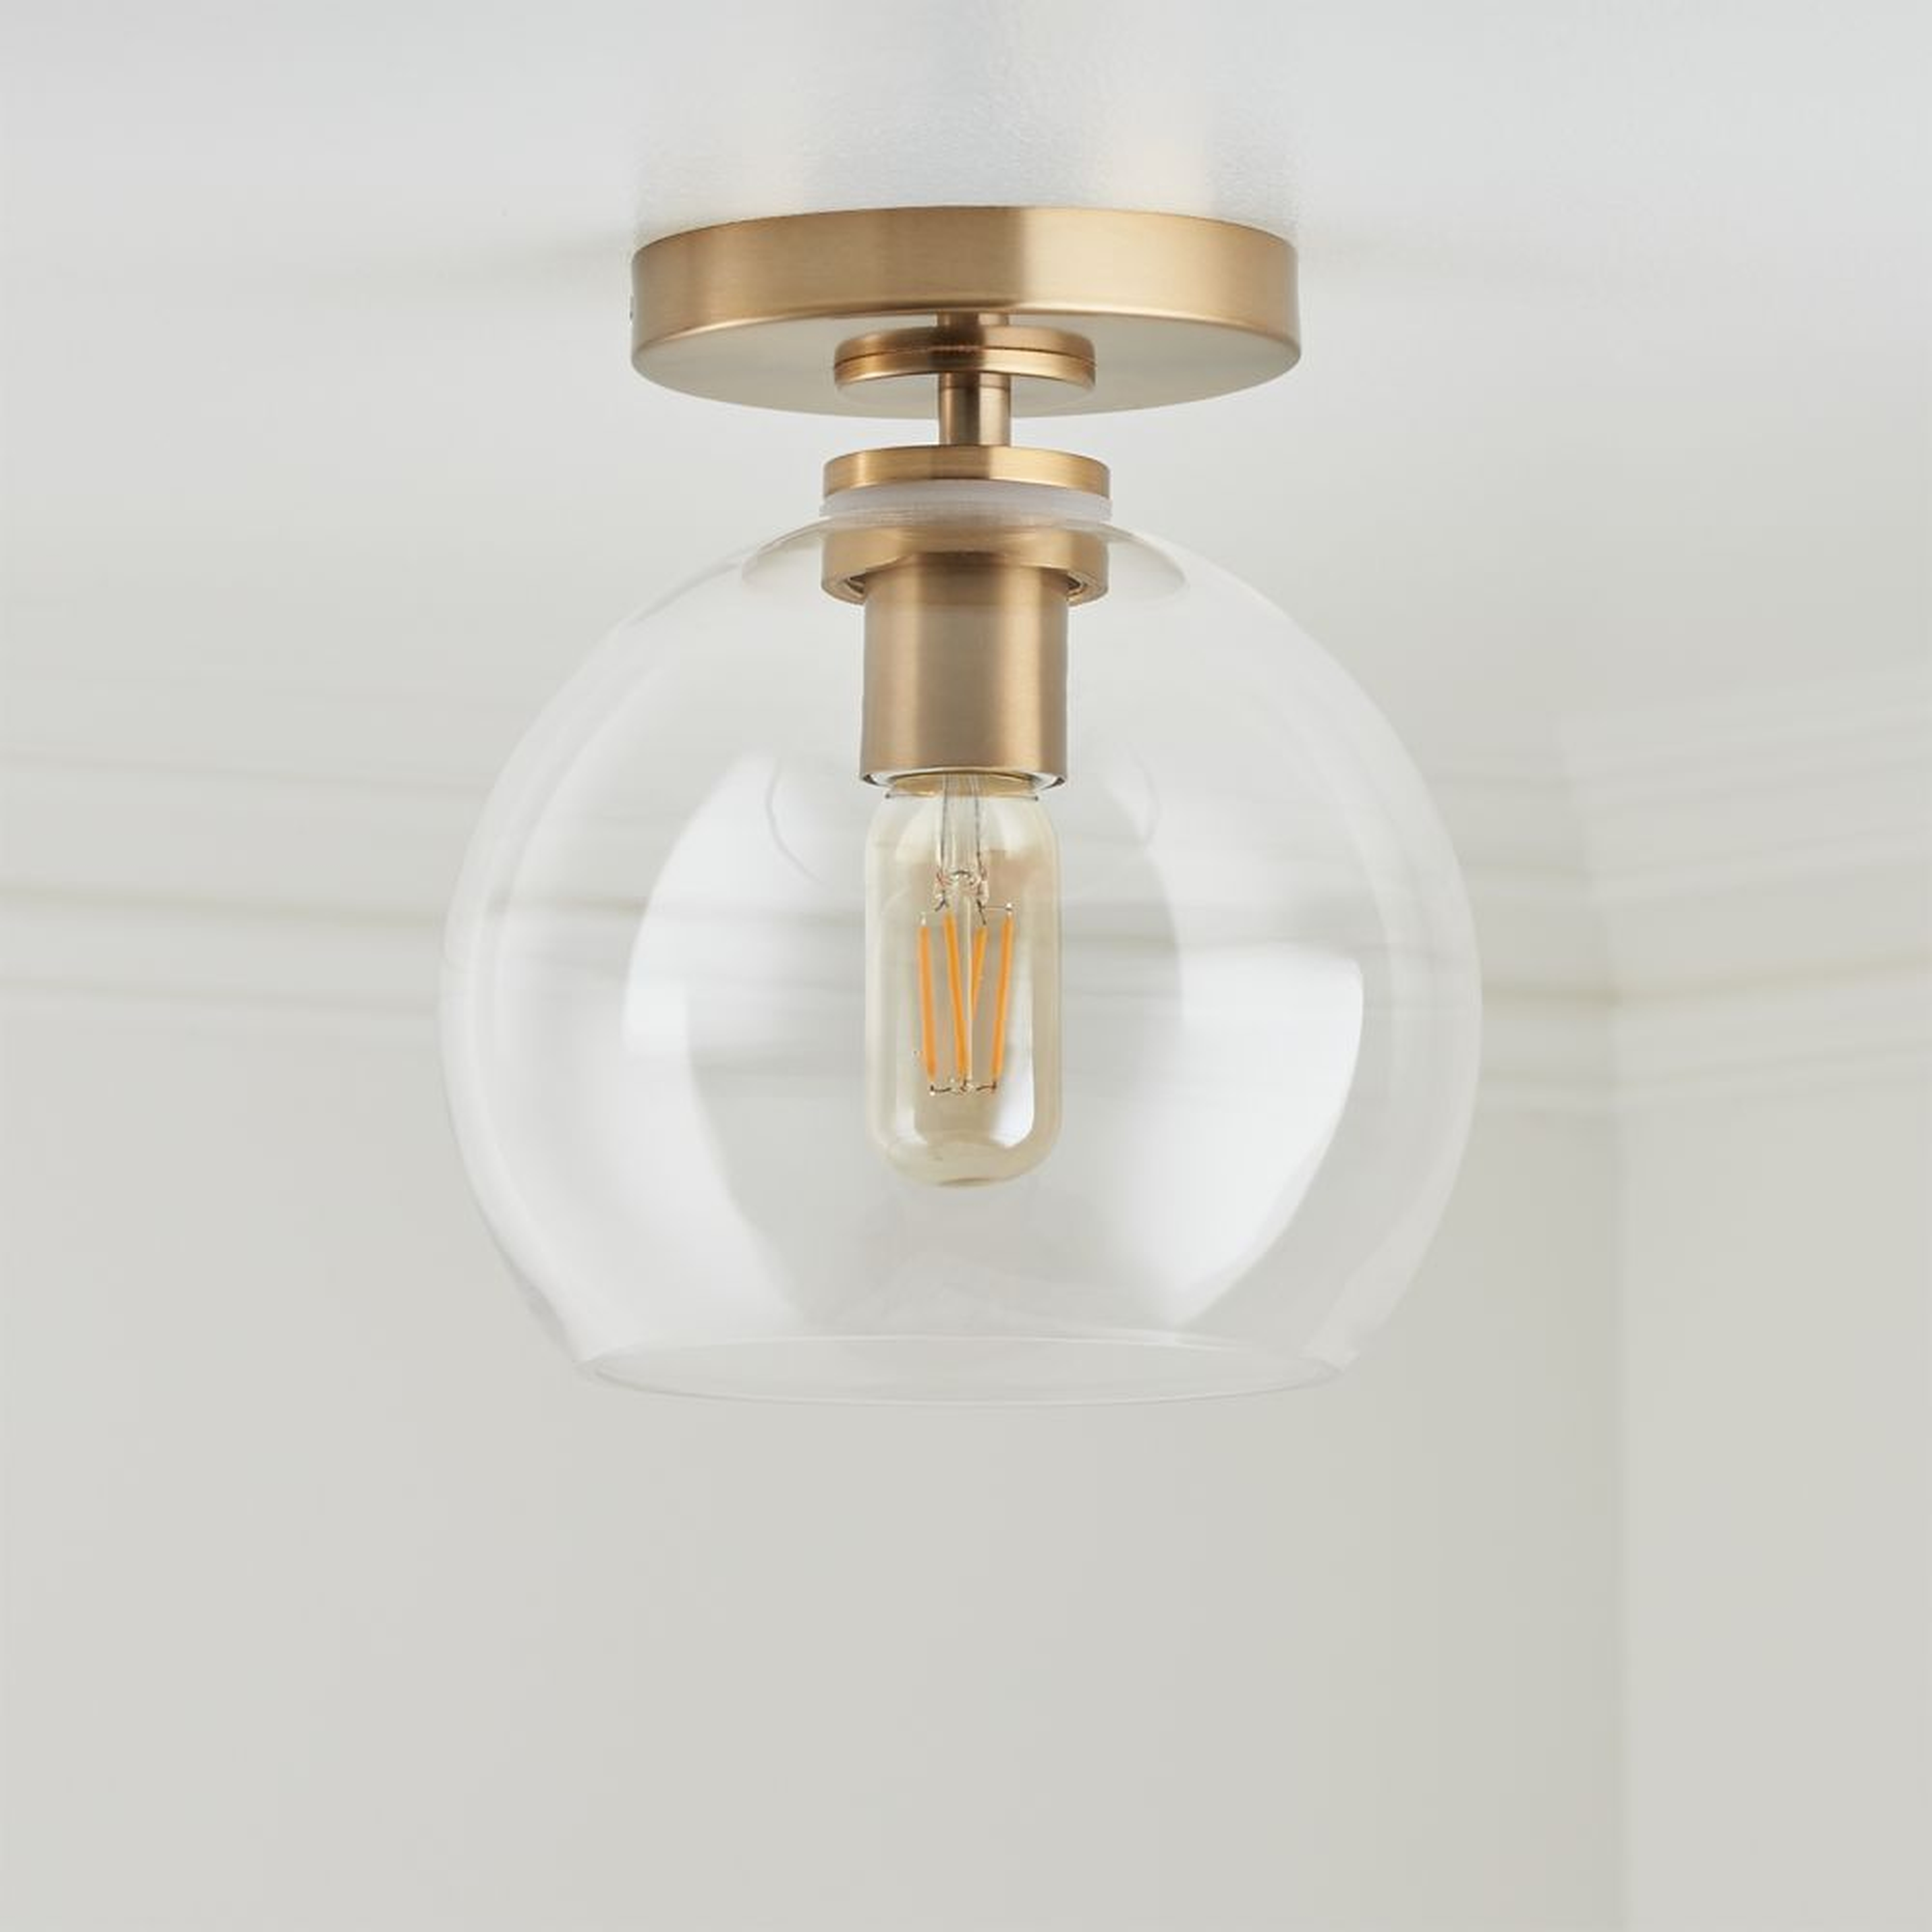 Arren Brass Flush Mount Light with Clear Round Shade - Crate and Barrel